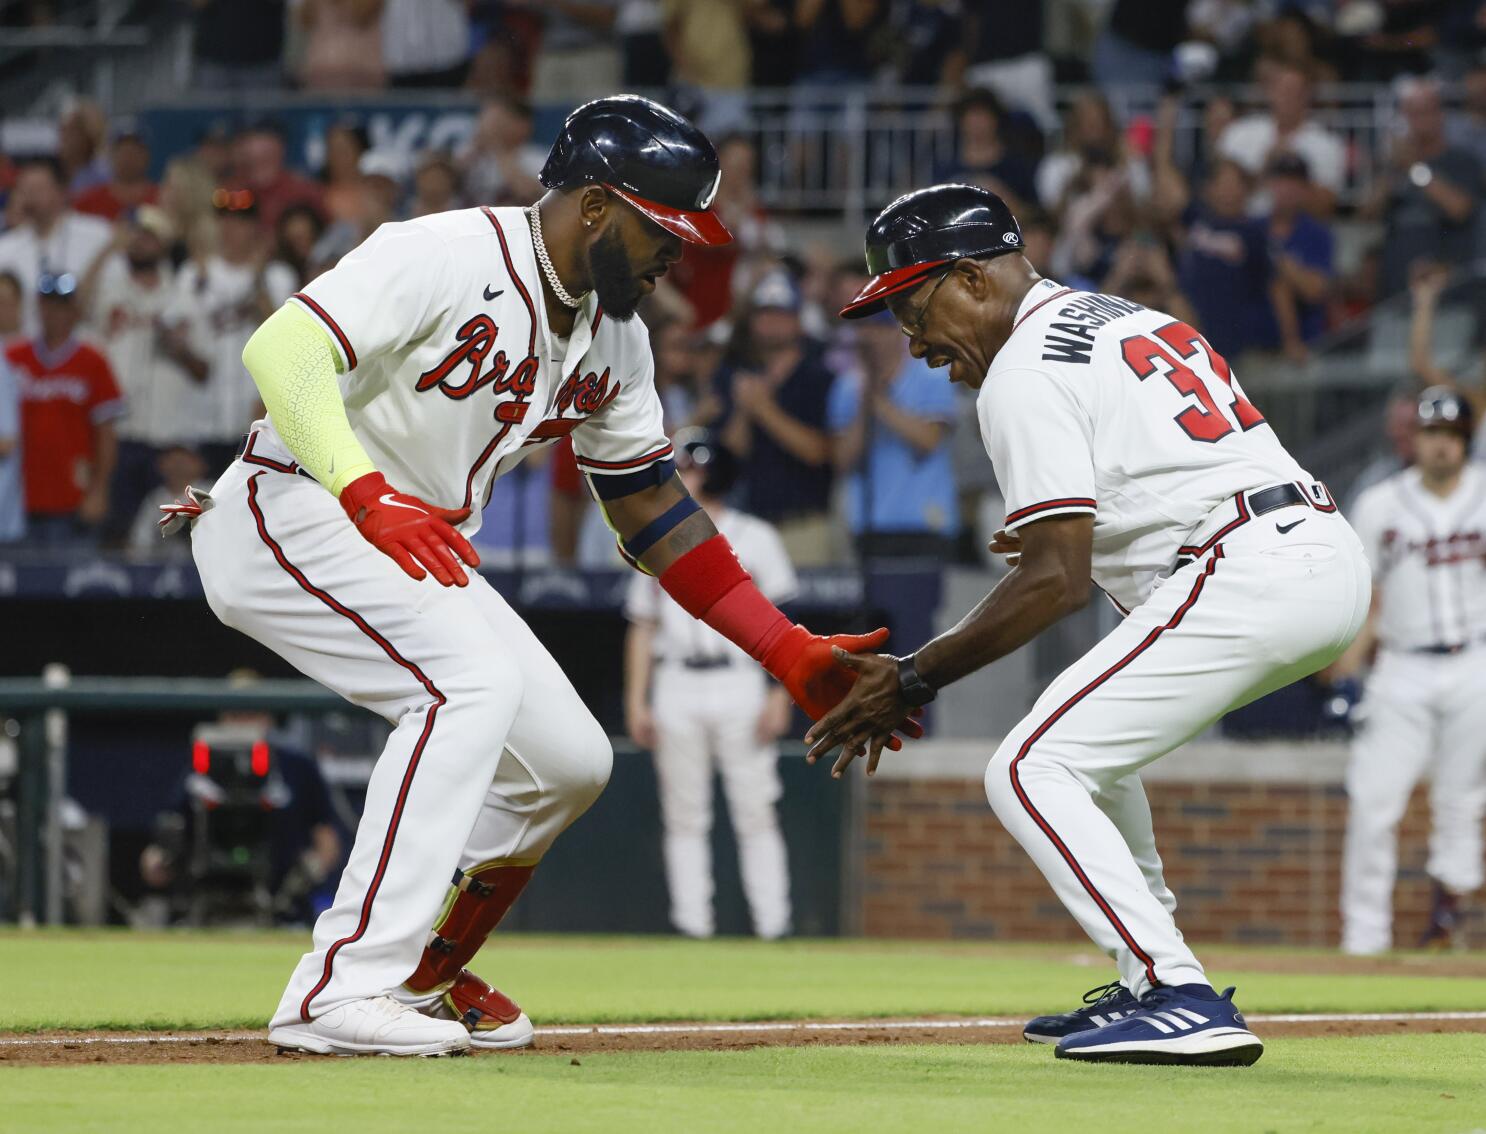 Braves OF Marcell Ozuna receives retroactive 20-game suspension for  violating MLB domestic violence policy